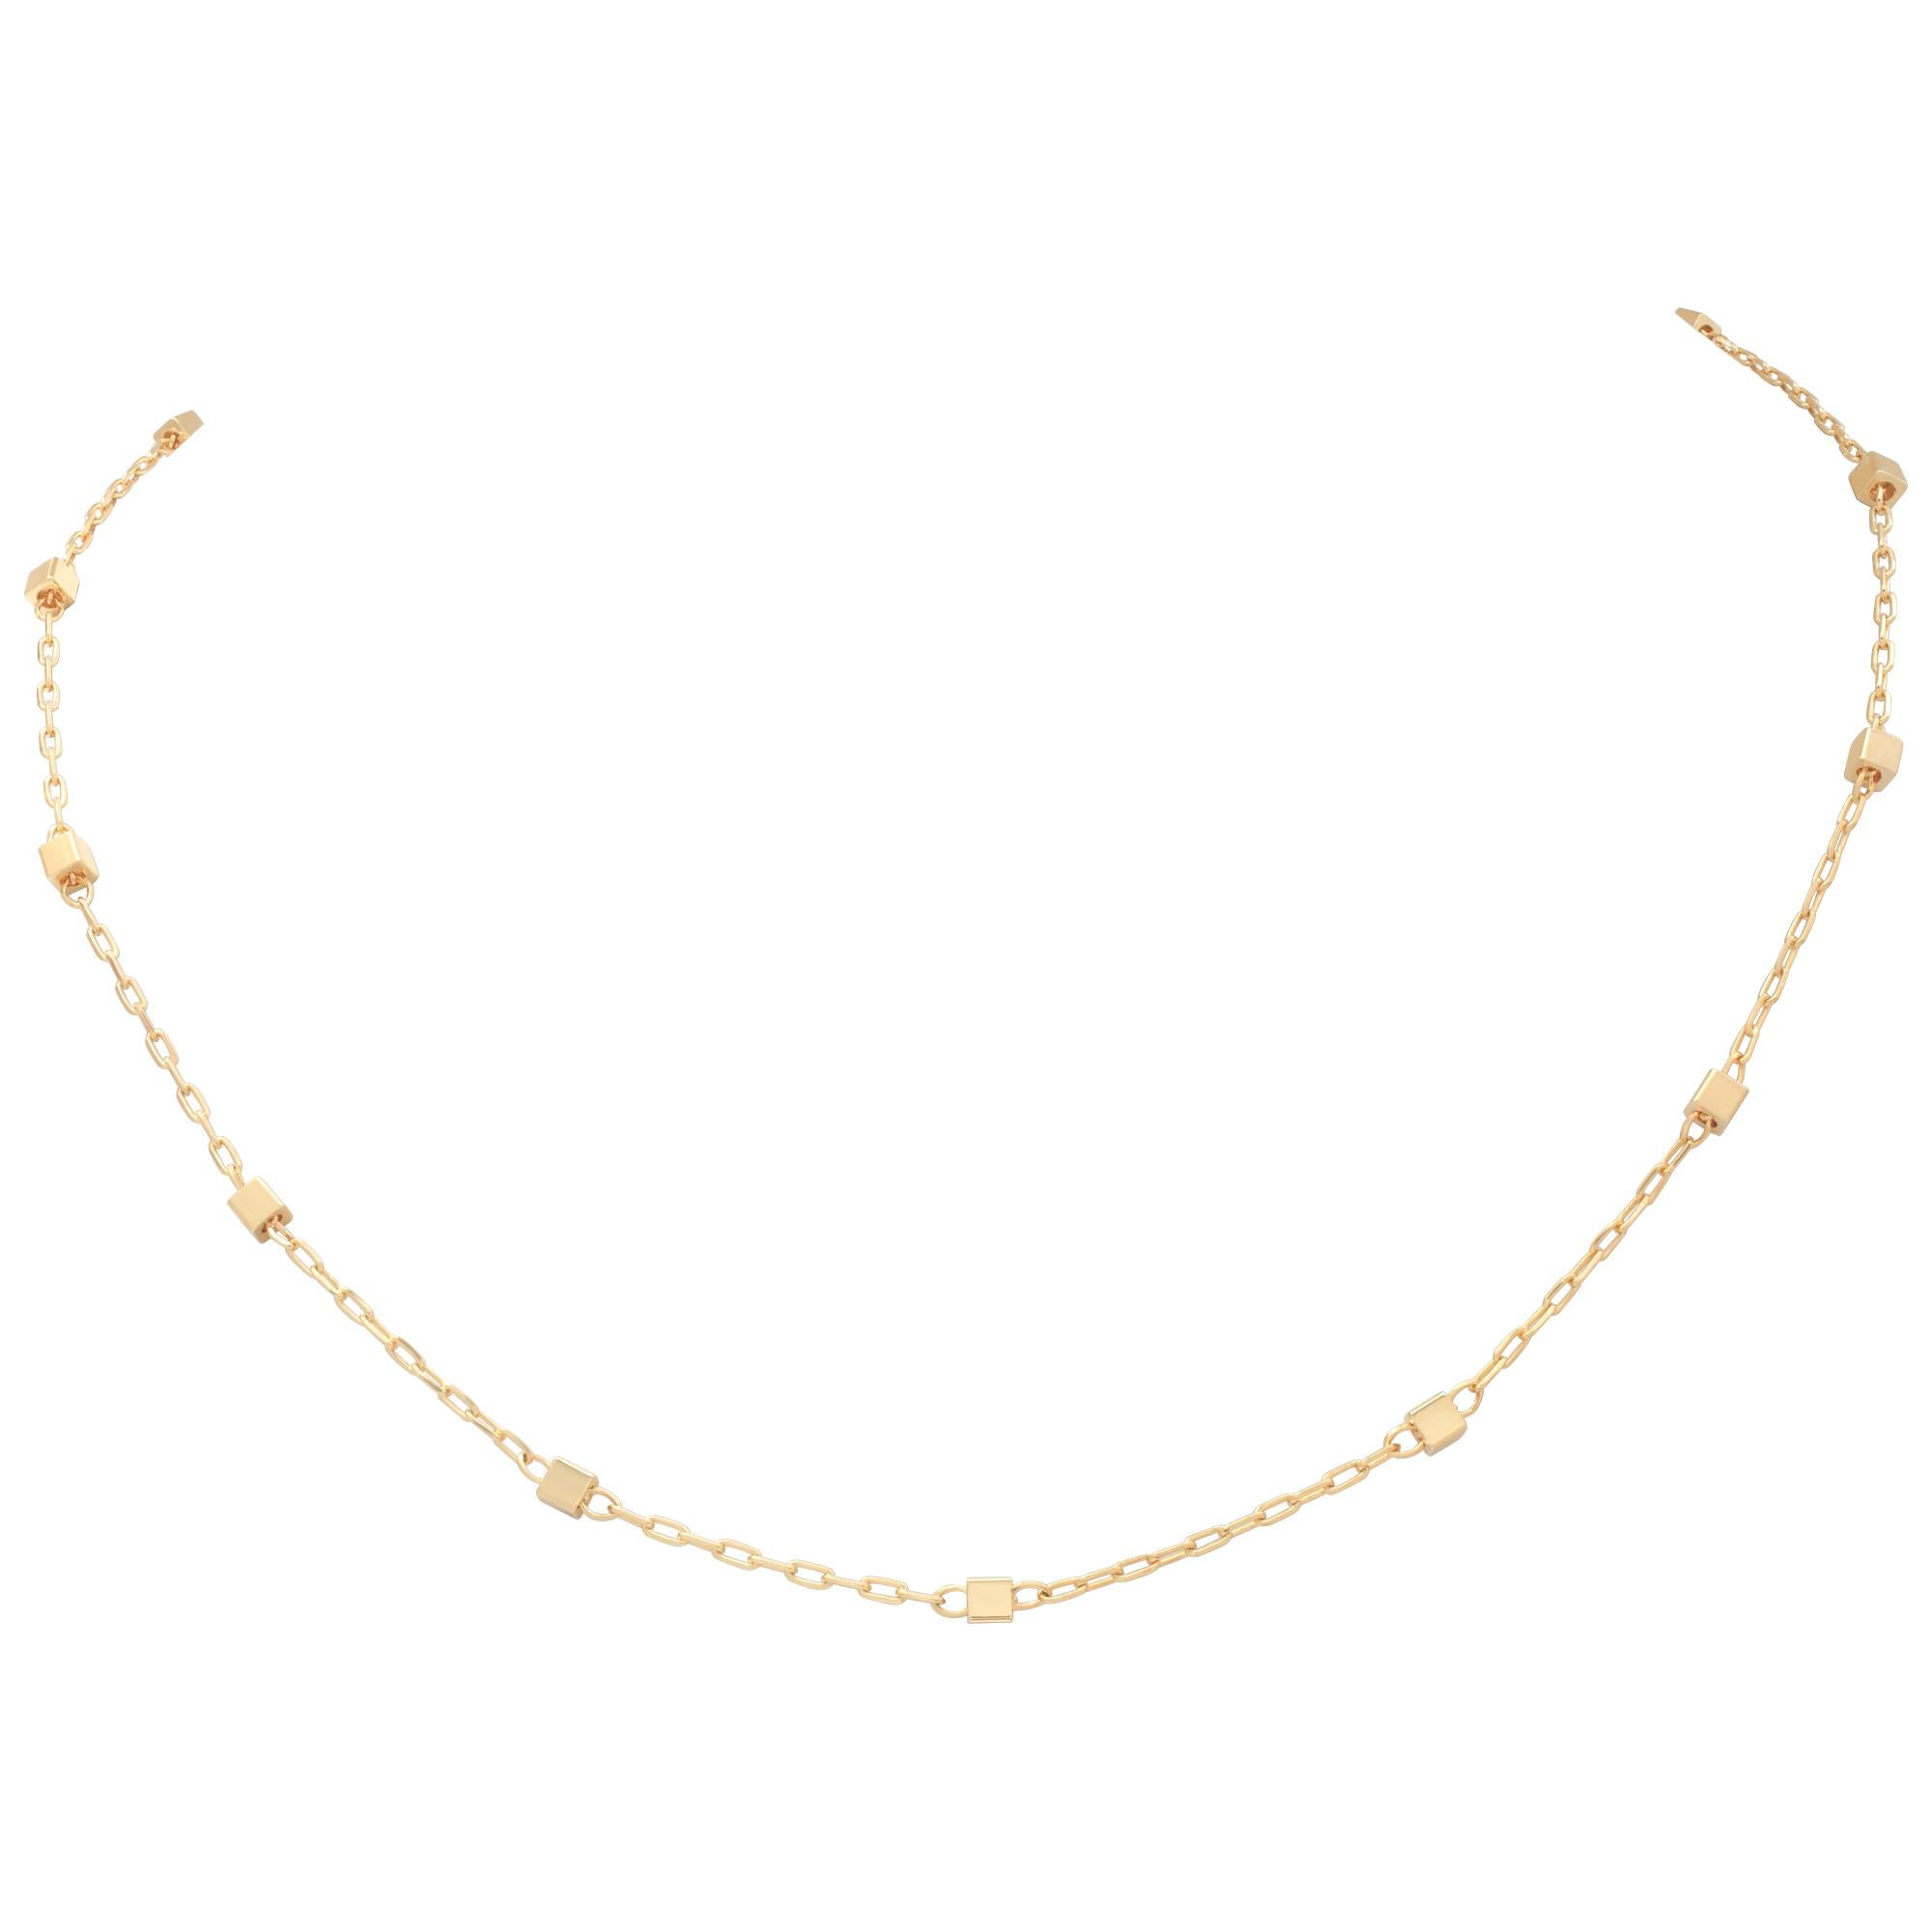 Box style link chain in 18k yellow gold with o-ring clasp. Length 17.5 inches.
